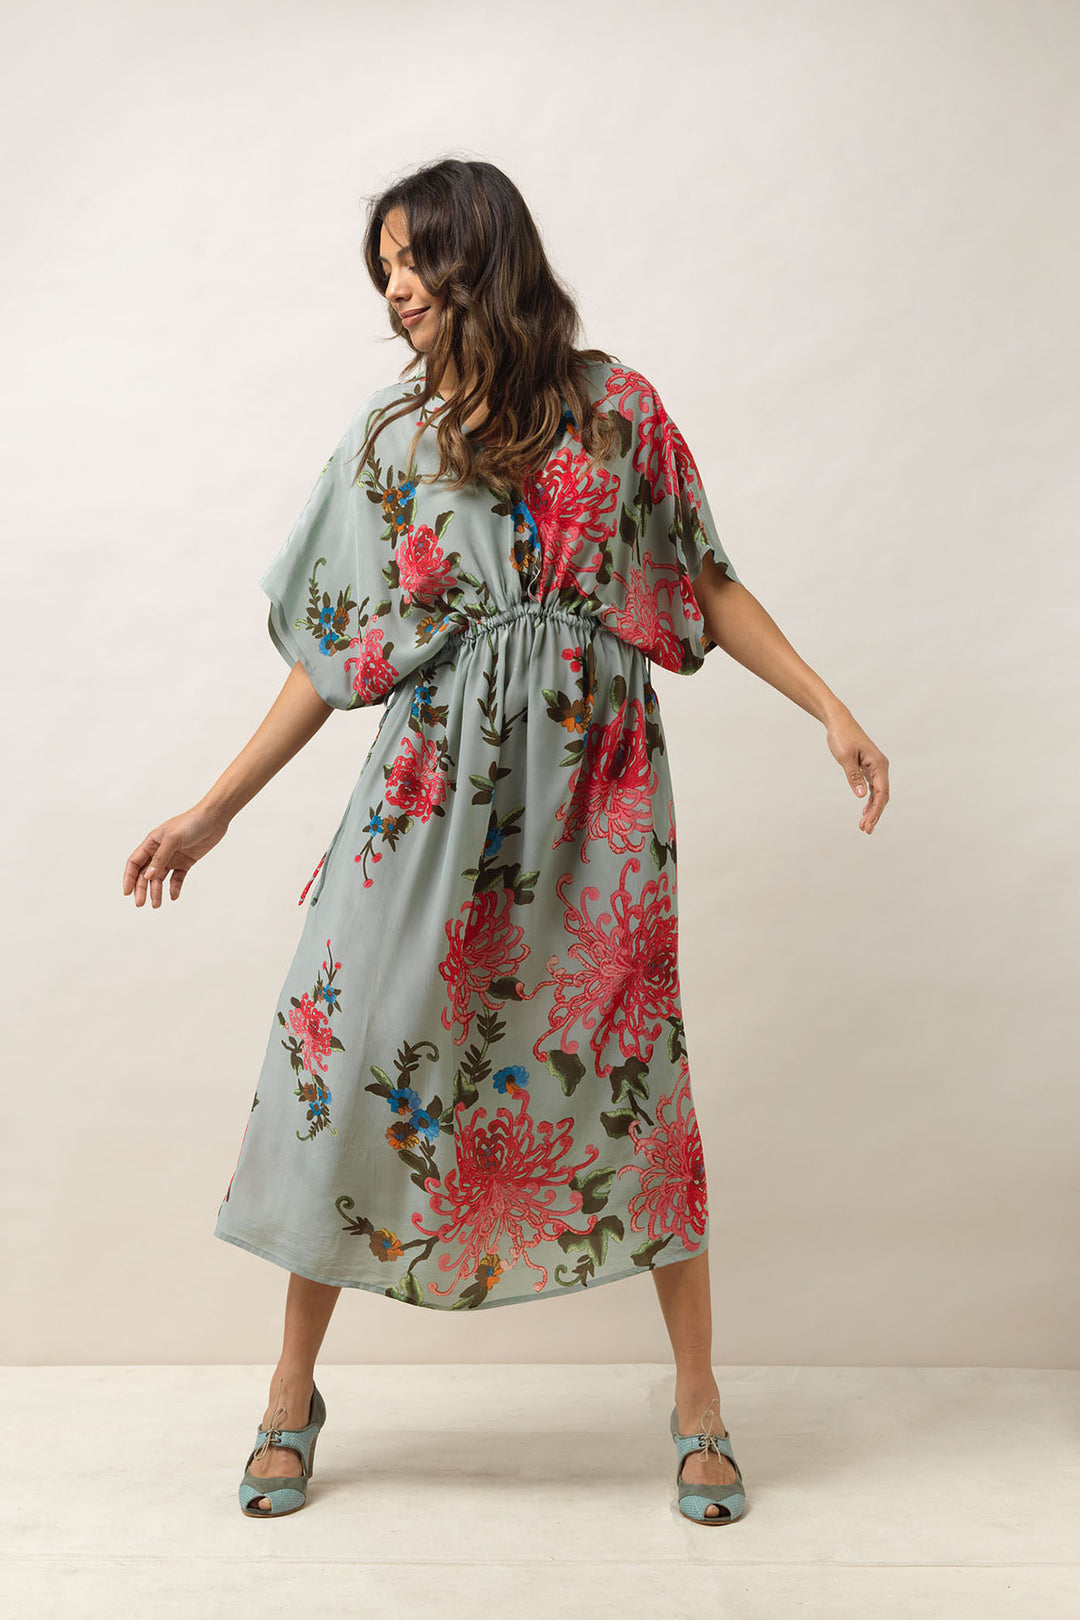 Women's lightweight beach cover up dress with tie waist in aqua with chrysanthemum print by One Hundred Stars